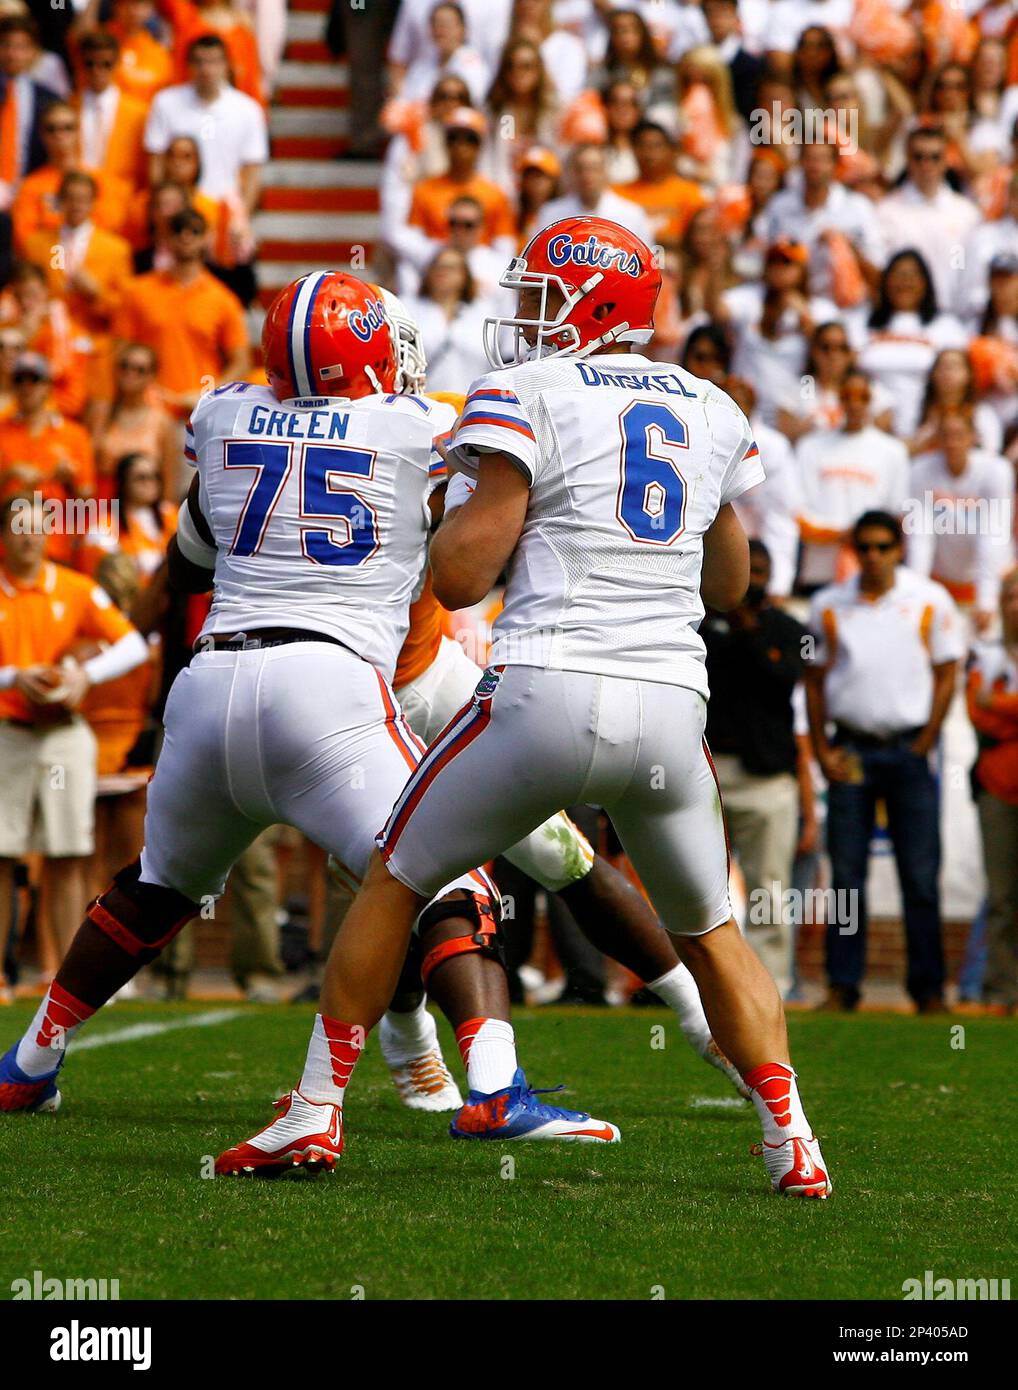 October 04 2014: Florida Gators quarterback Jeff Driskel (6) in first half action at Neyland Stadium in Knoxville, Tennessee. (Icon Sportswire via AP Images) Stock Photo